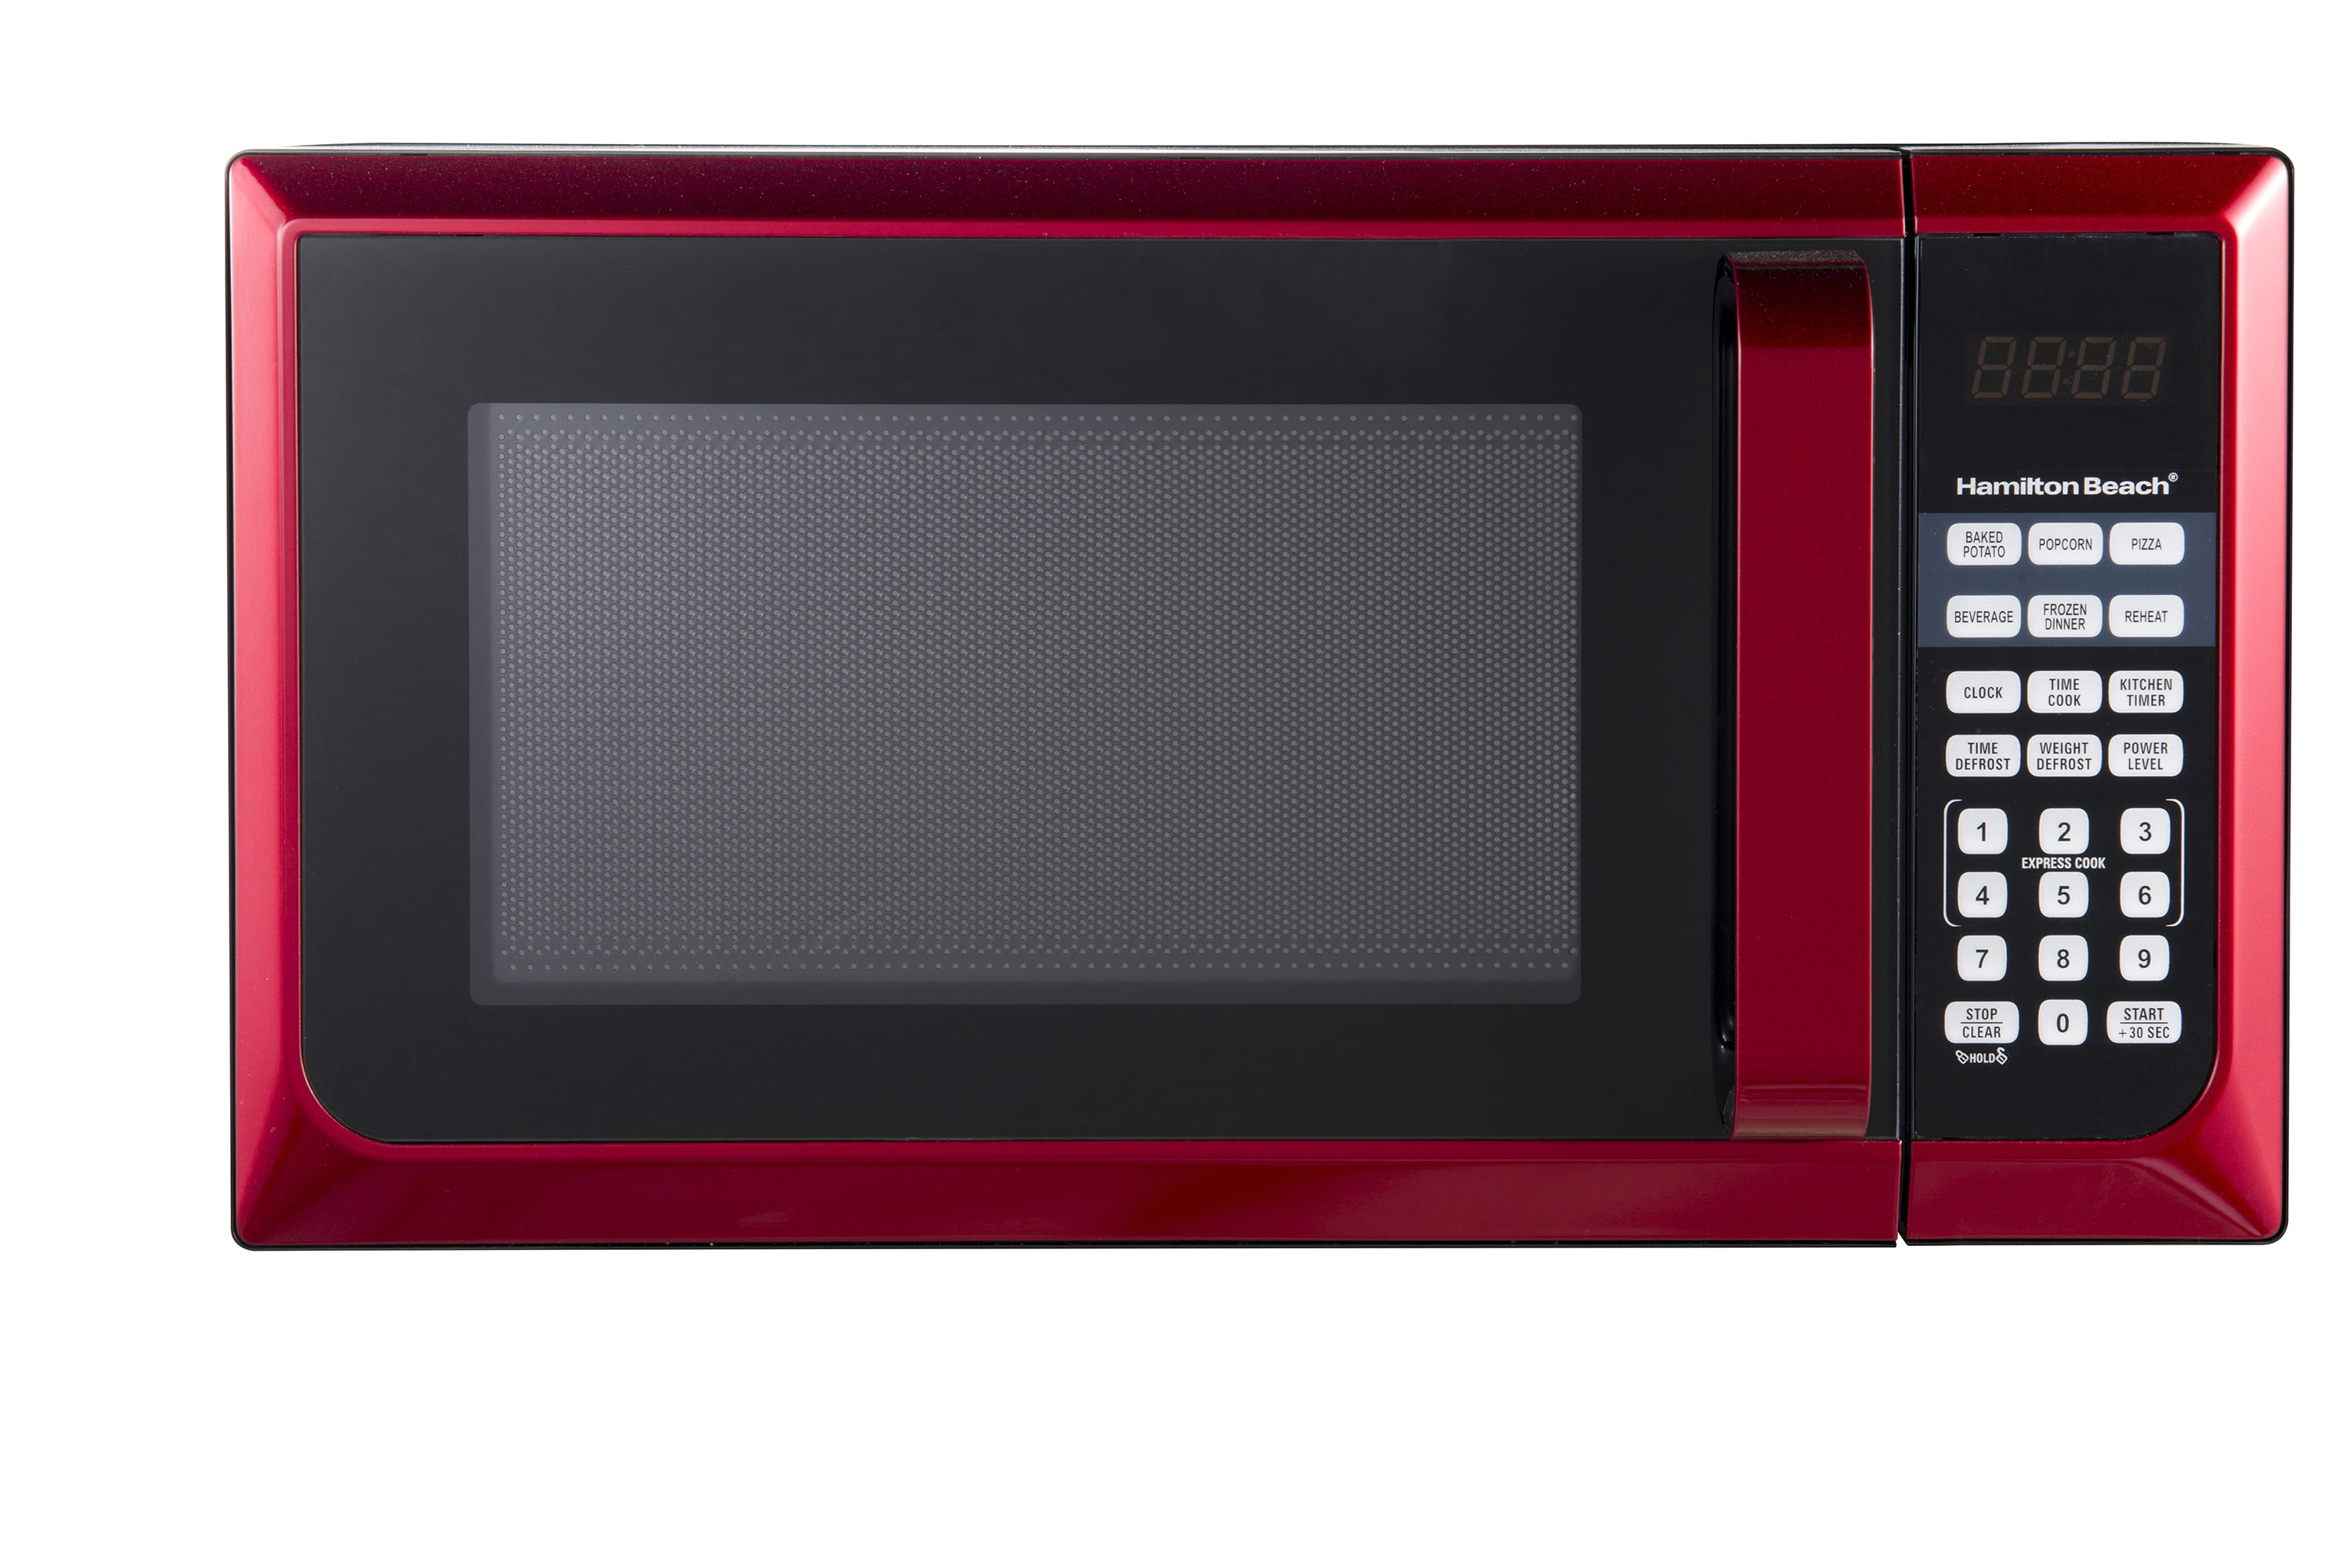 Ft Hamilton Beach Modern 0.9 Cu touch-pad Microwave Oven Red Stainless Steel 